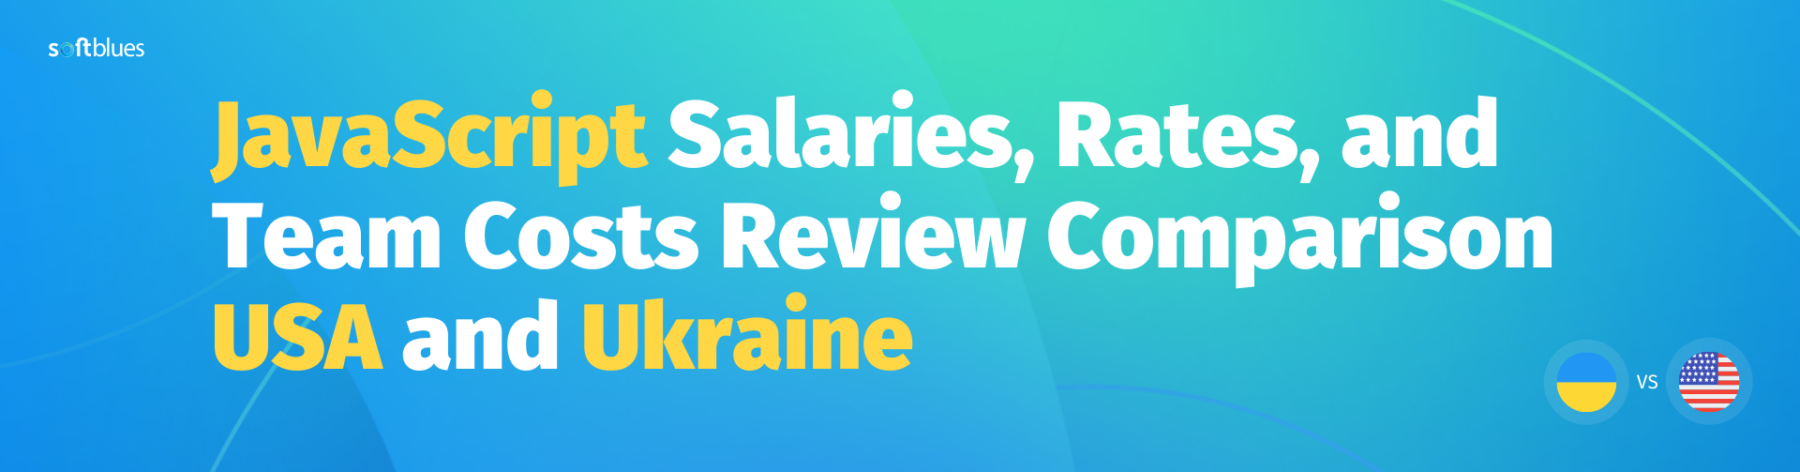 JavaScript Salaries, Rates, and Team Costs Review Comparison USA and Ukraine